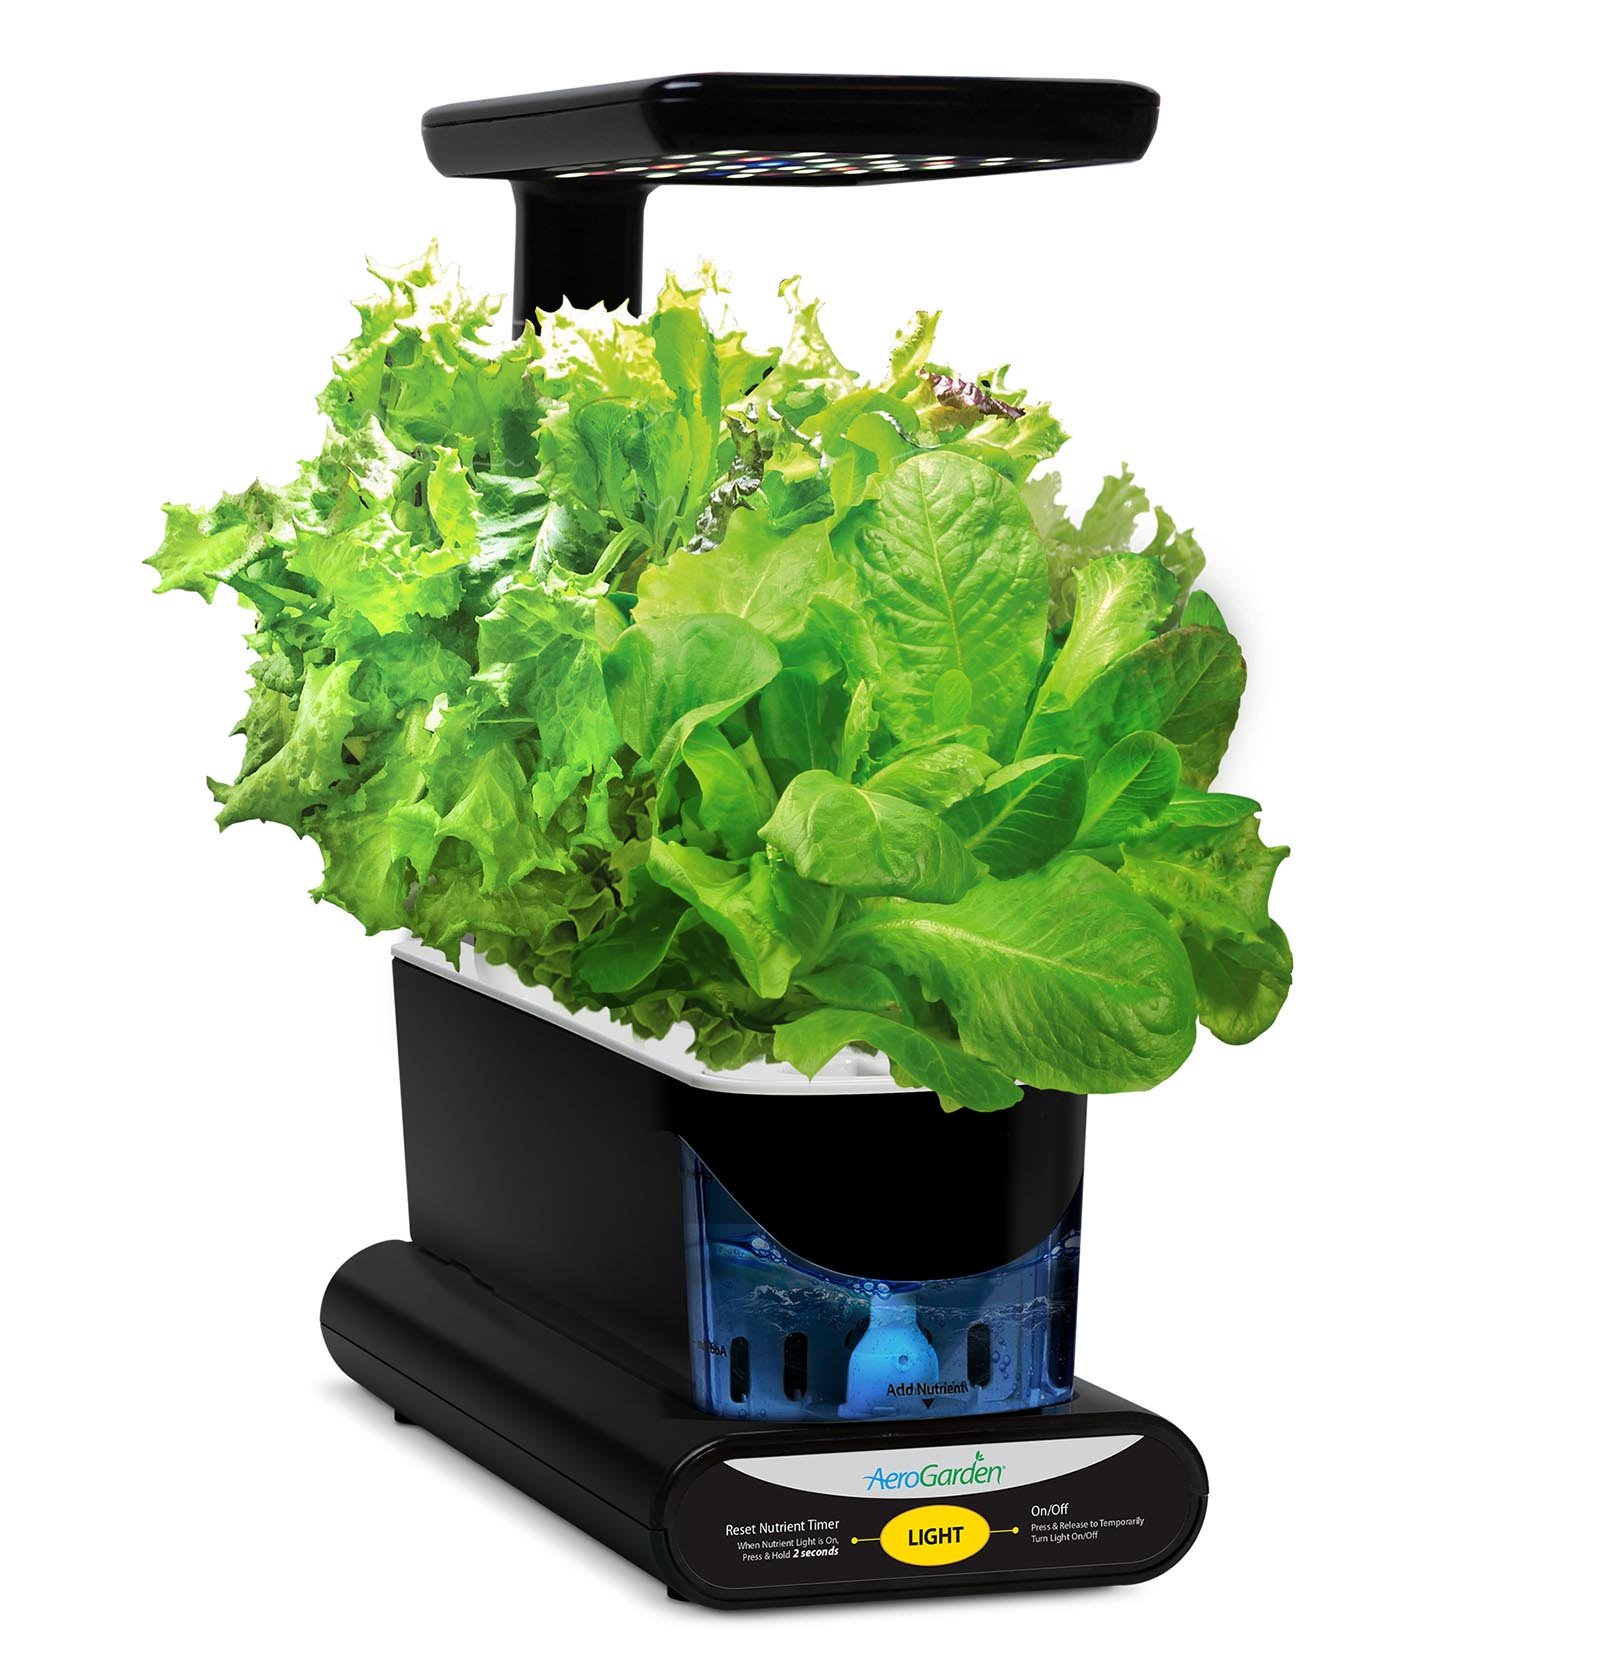 AeroGarden Sprout LED, Black with Herb Seed Kit - image 5 of 6